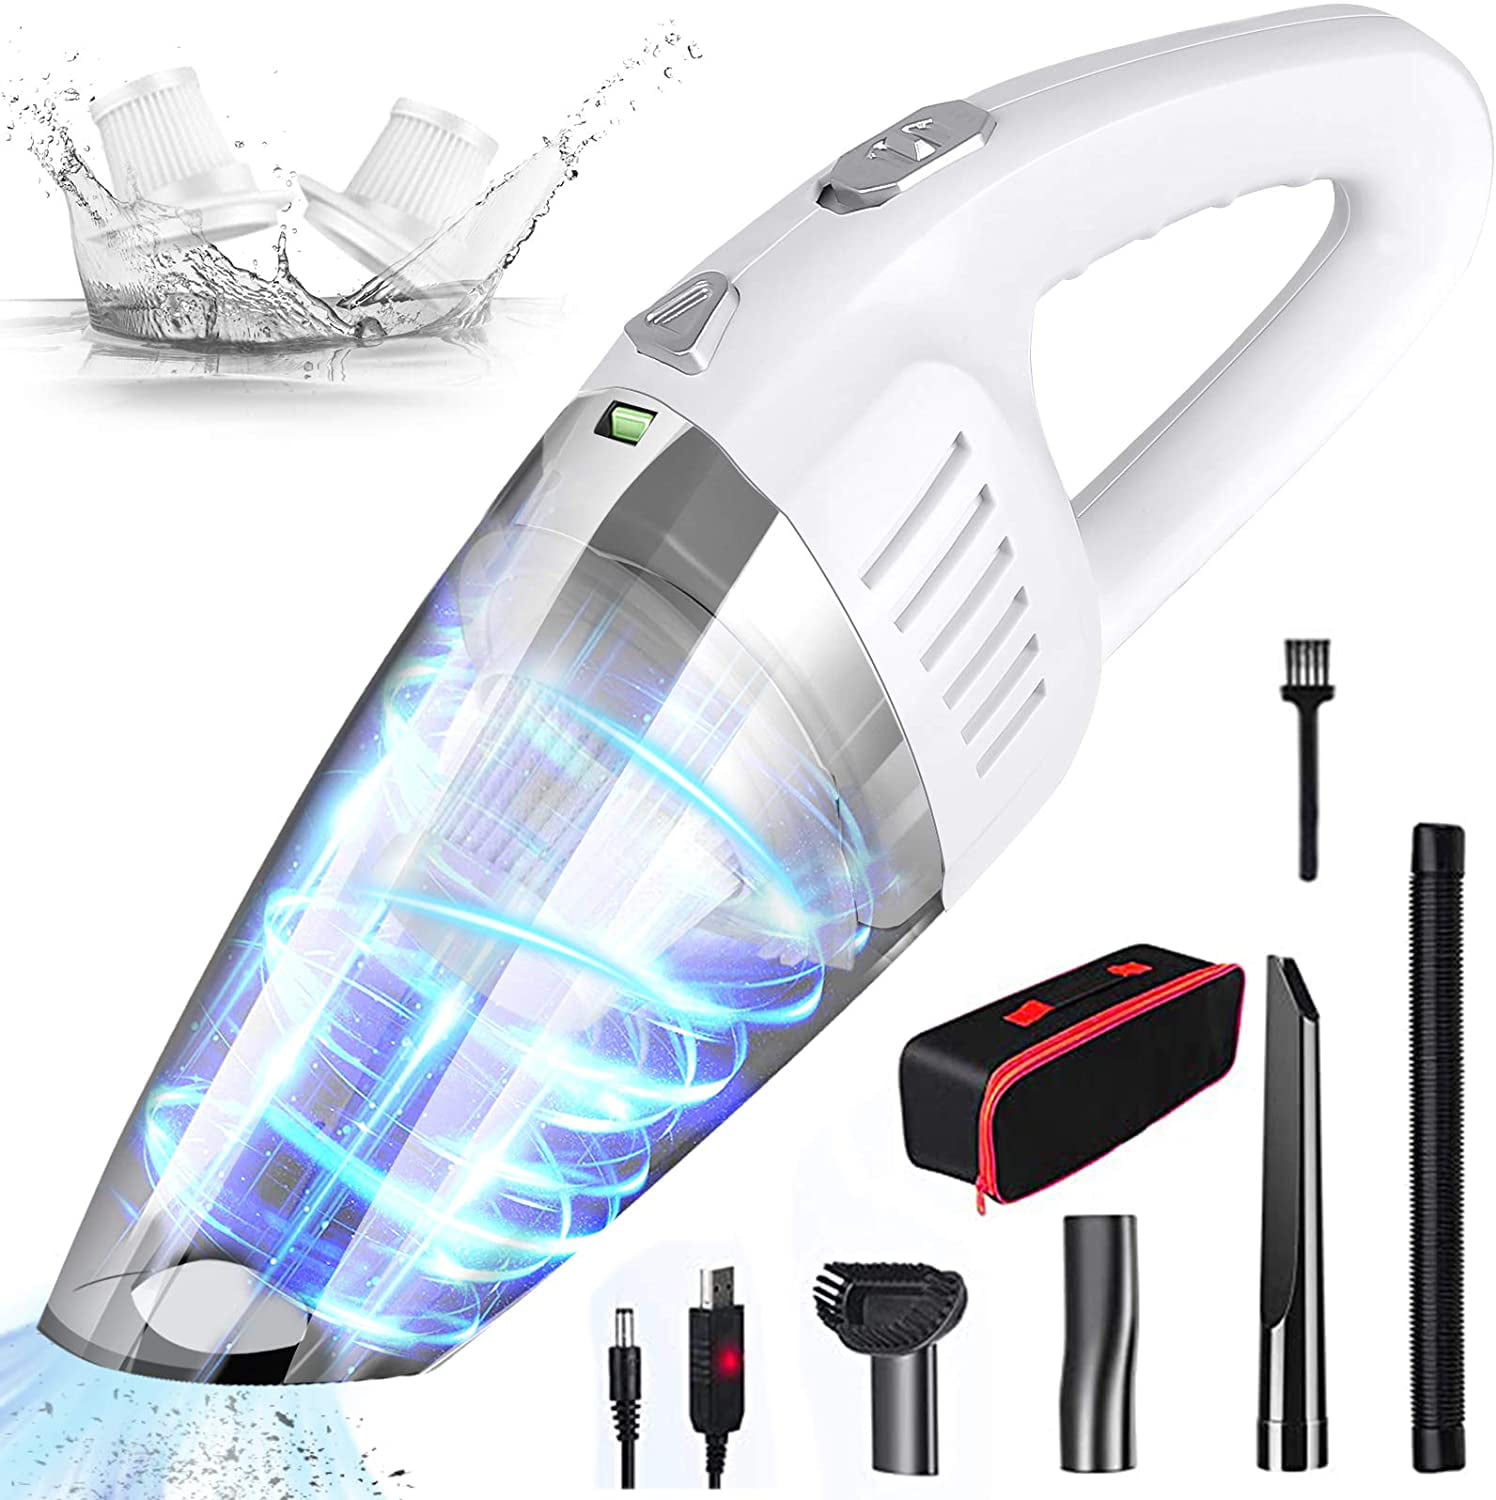 Car Vacuum Cleaner Car Vacuum Cleaner High Power Handheld Vacuum Cleaner 8000Pa Suction with 16.4ft Cord Hand Vacuum Wet and Dry Cleaning Portable Vacuum Cleaner for Car Kit with Metal HEPA Filter 